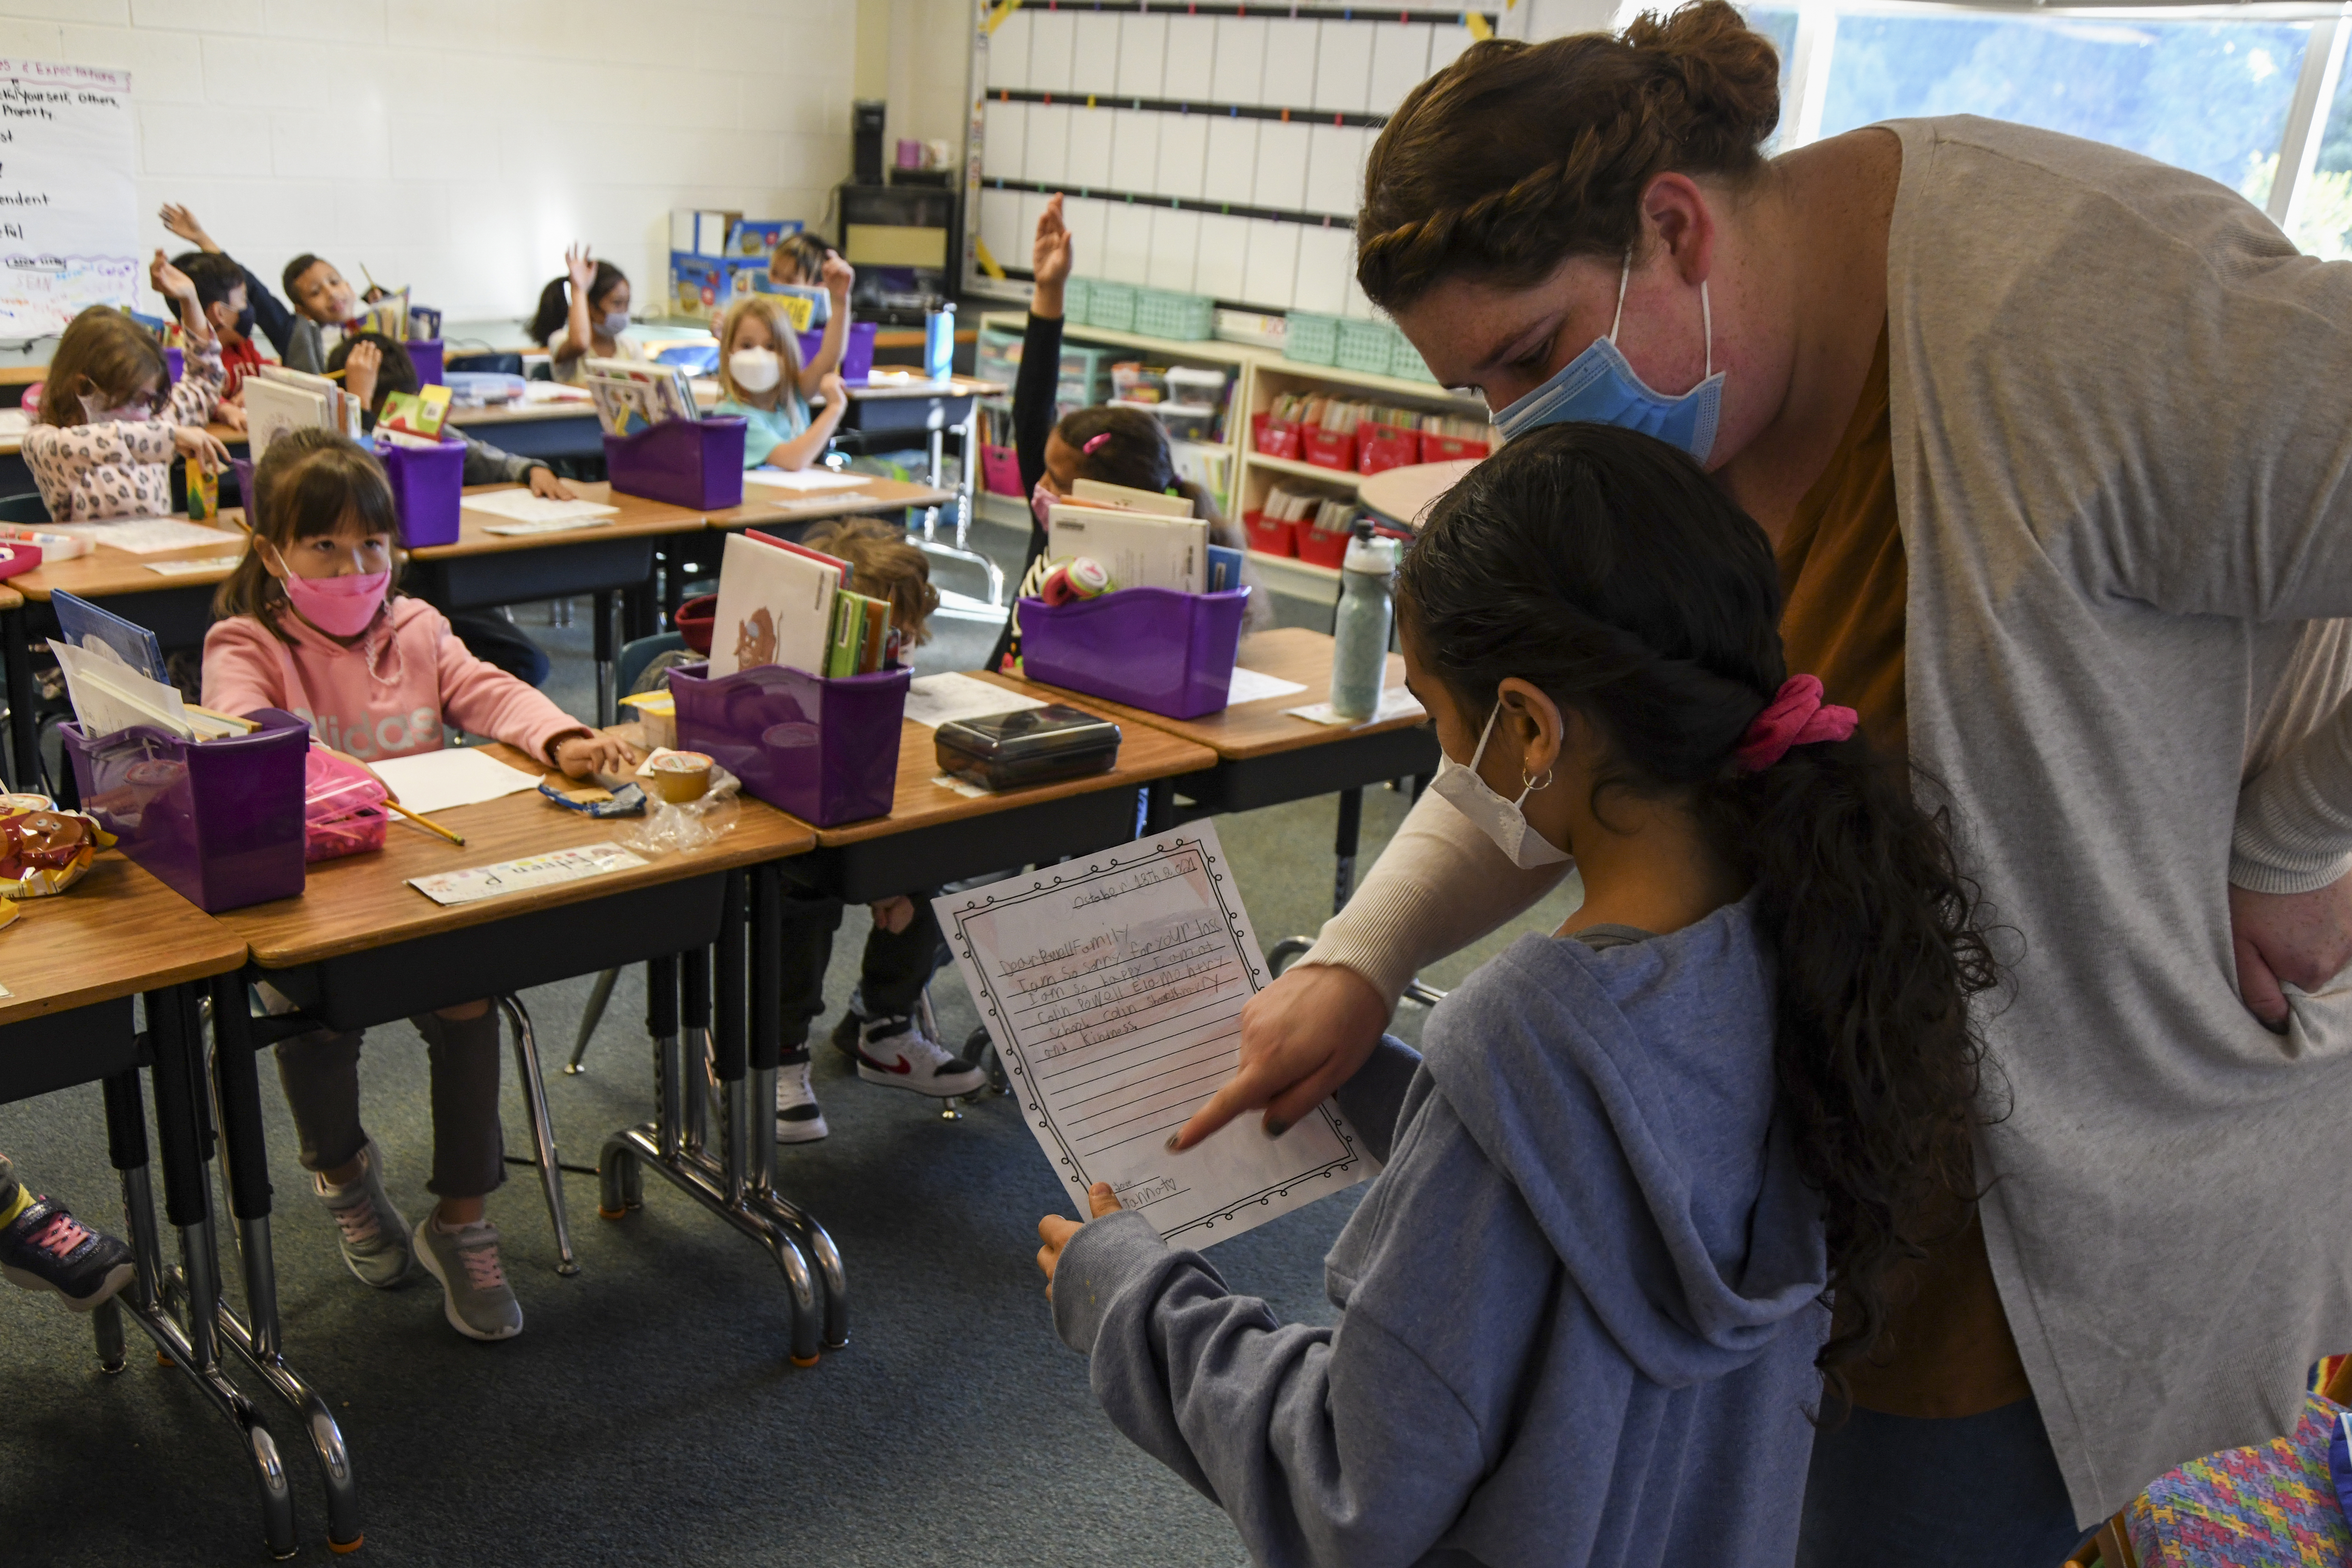 Kaitlin North, 2nd grade teacher at Colin L. Powell Elementary School, helps a student read aloud a letter they wrote to the family of Colin Powell with their condolences after news of his passing due to COVID-19 complications was announced, on October 19, 2021 in Centreville, Virginia. Students and faculty at the school, which is named after the former Secretary of State, honored his legacy by lowering the school's flag to half-staff, watching a video of Powell and holding a moment of silence. (Photo by Kenny Holston/Getty Images)